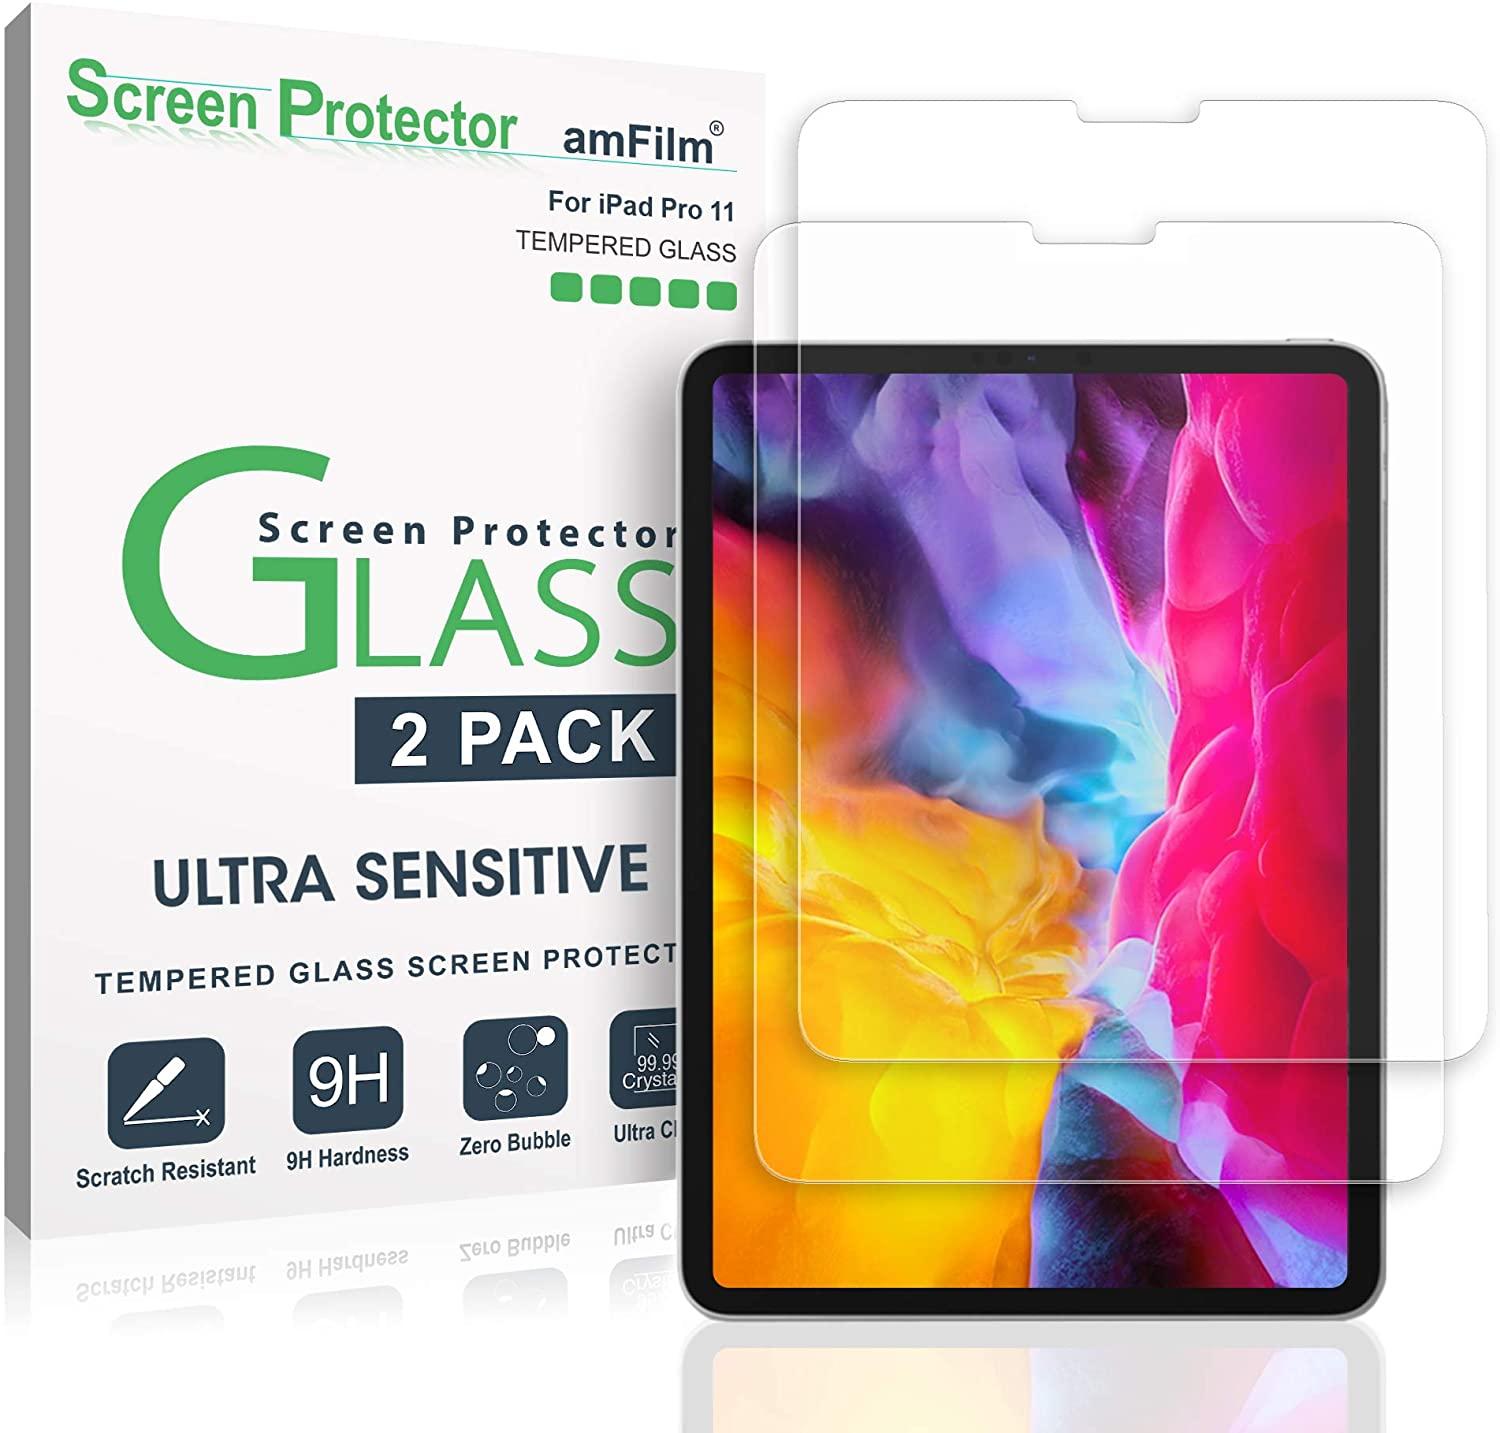 2 Apple iPad Pro 11in Tempered Glass Screen Protectors for $5.99